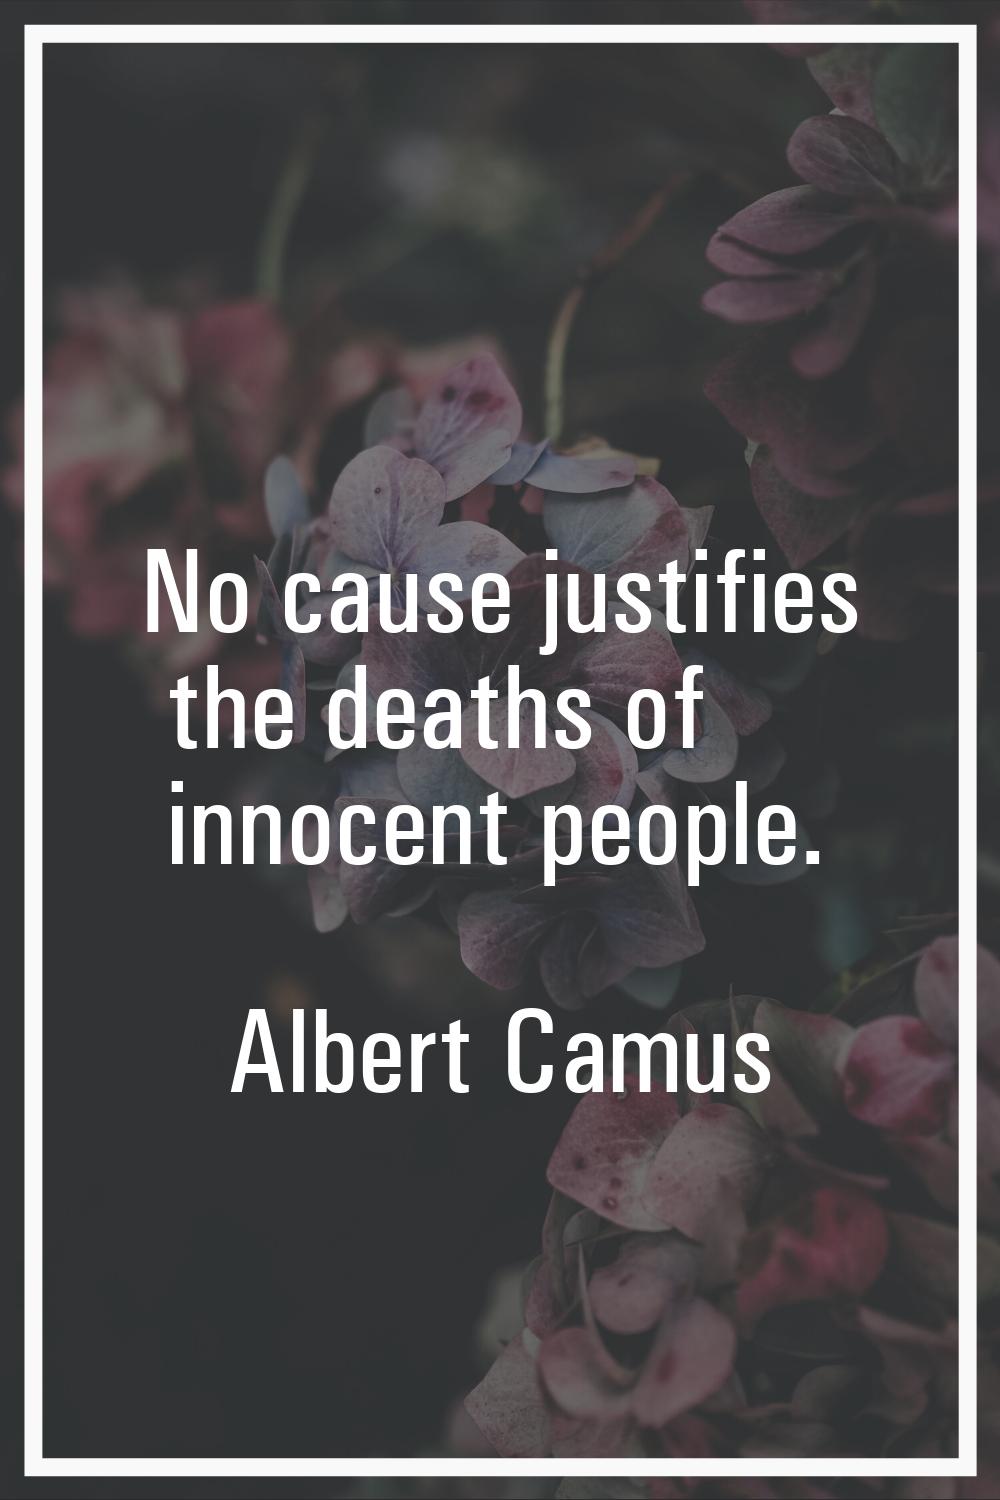 No cause justifies the deaths of innocent people.